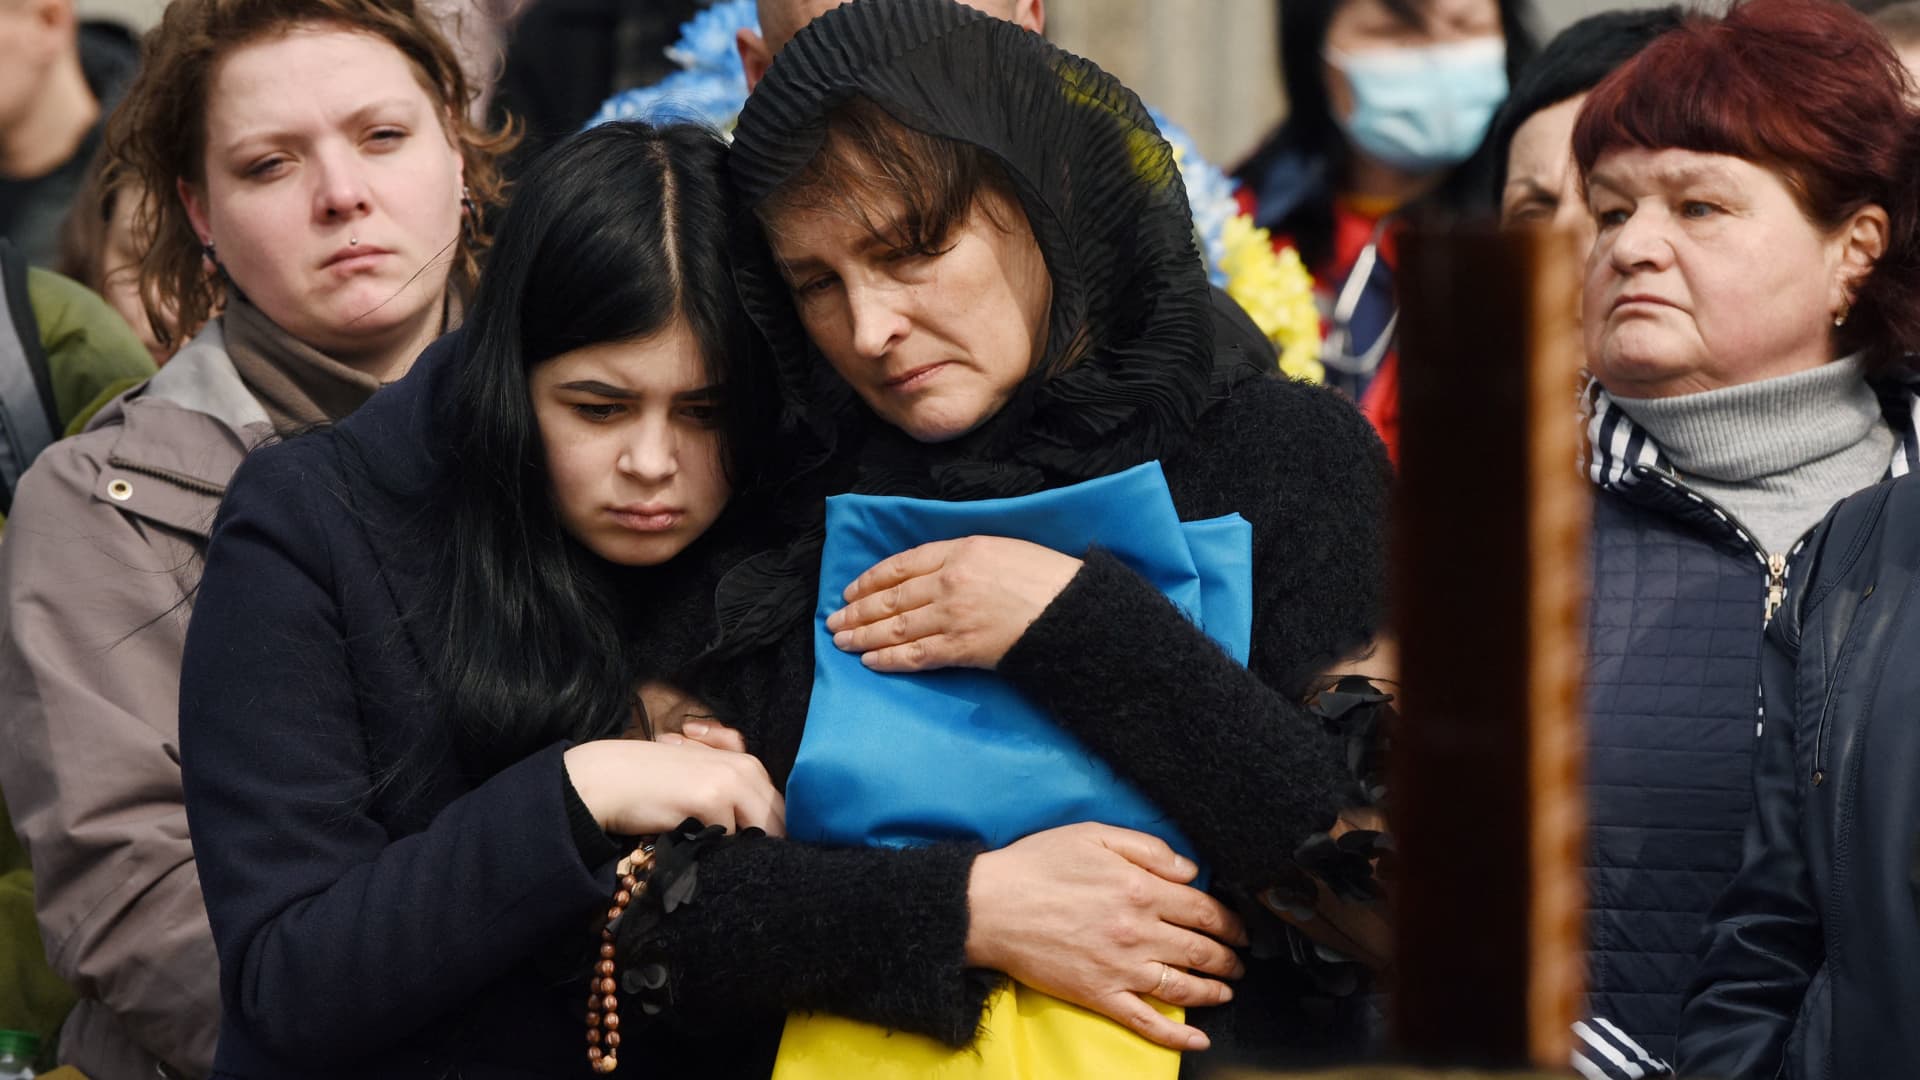 Relatives attend a ceremony at the funeral of the soldier Teodor Osadchyi, killed during the Russian invasion, at Lychakiv cemetery in Lviv, western Ukraine, on March 29, 2022.